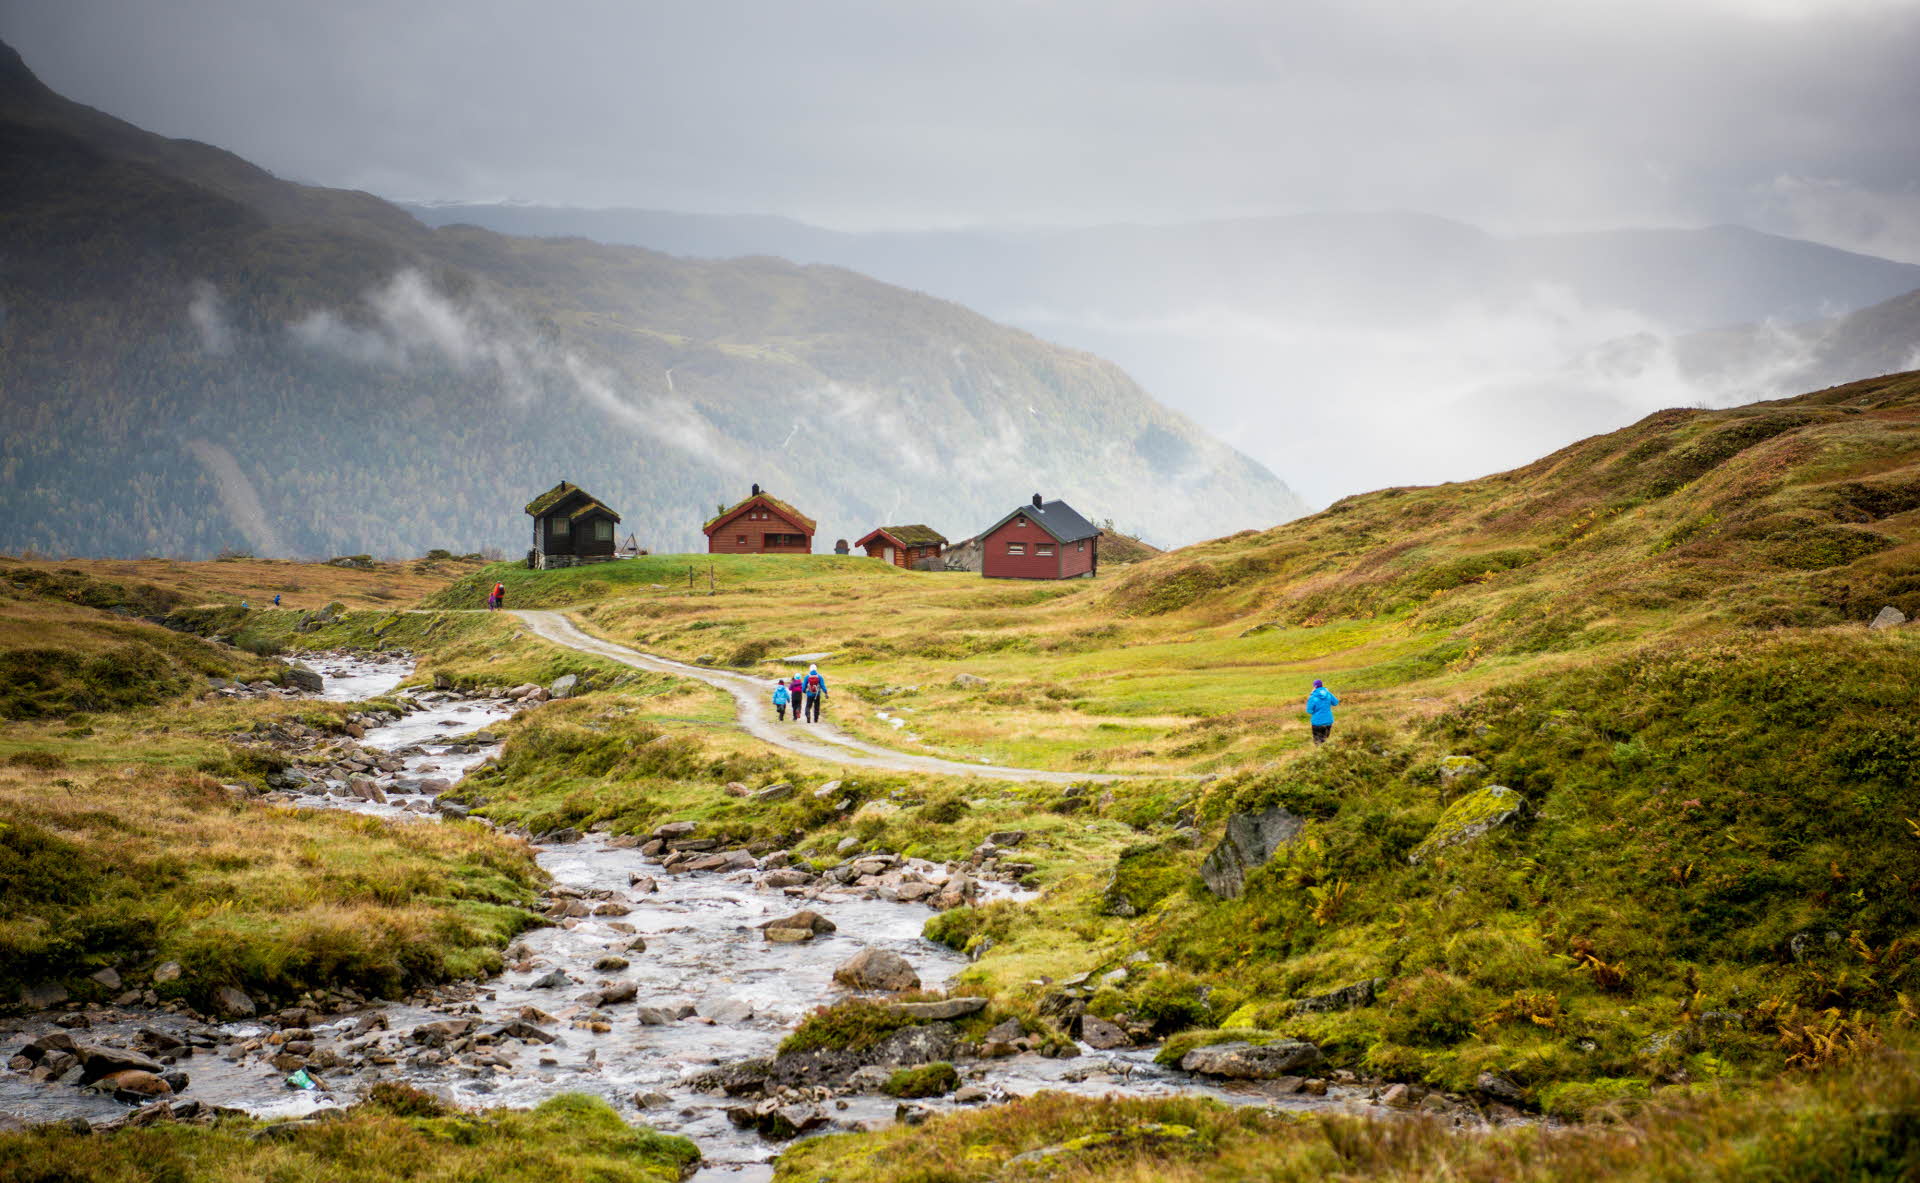 A team of hikers heading for Mørkvesstølen in rainy weather